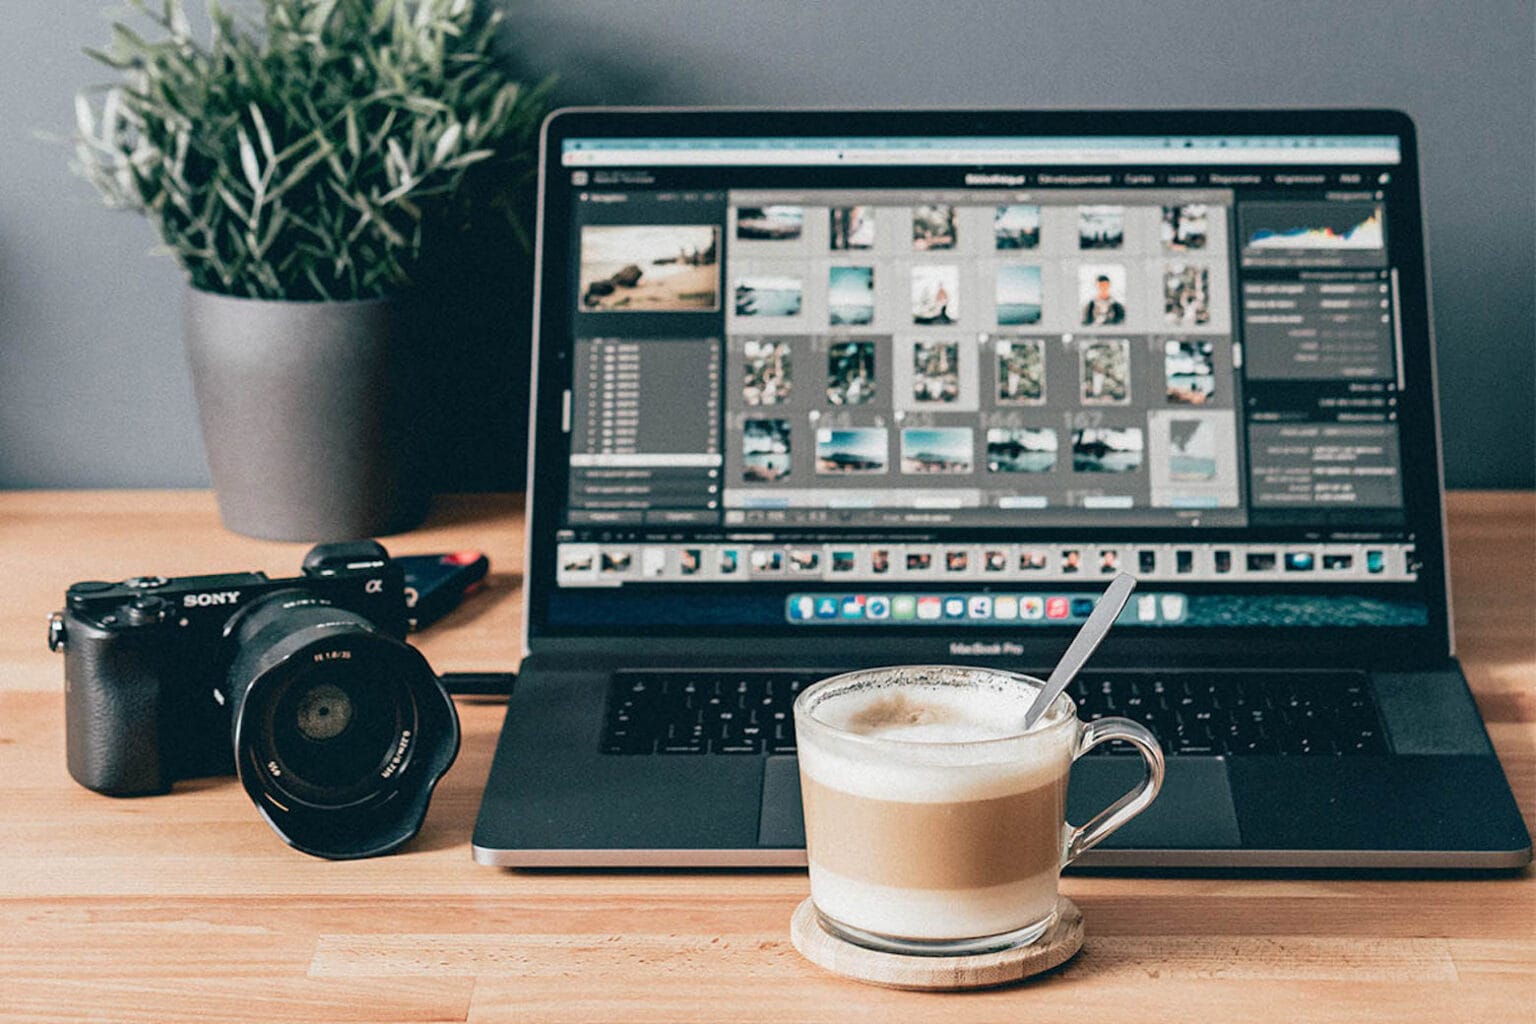 Learn how to edit using Photoshop for 91% off.